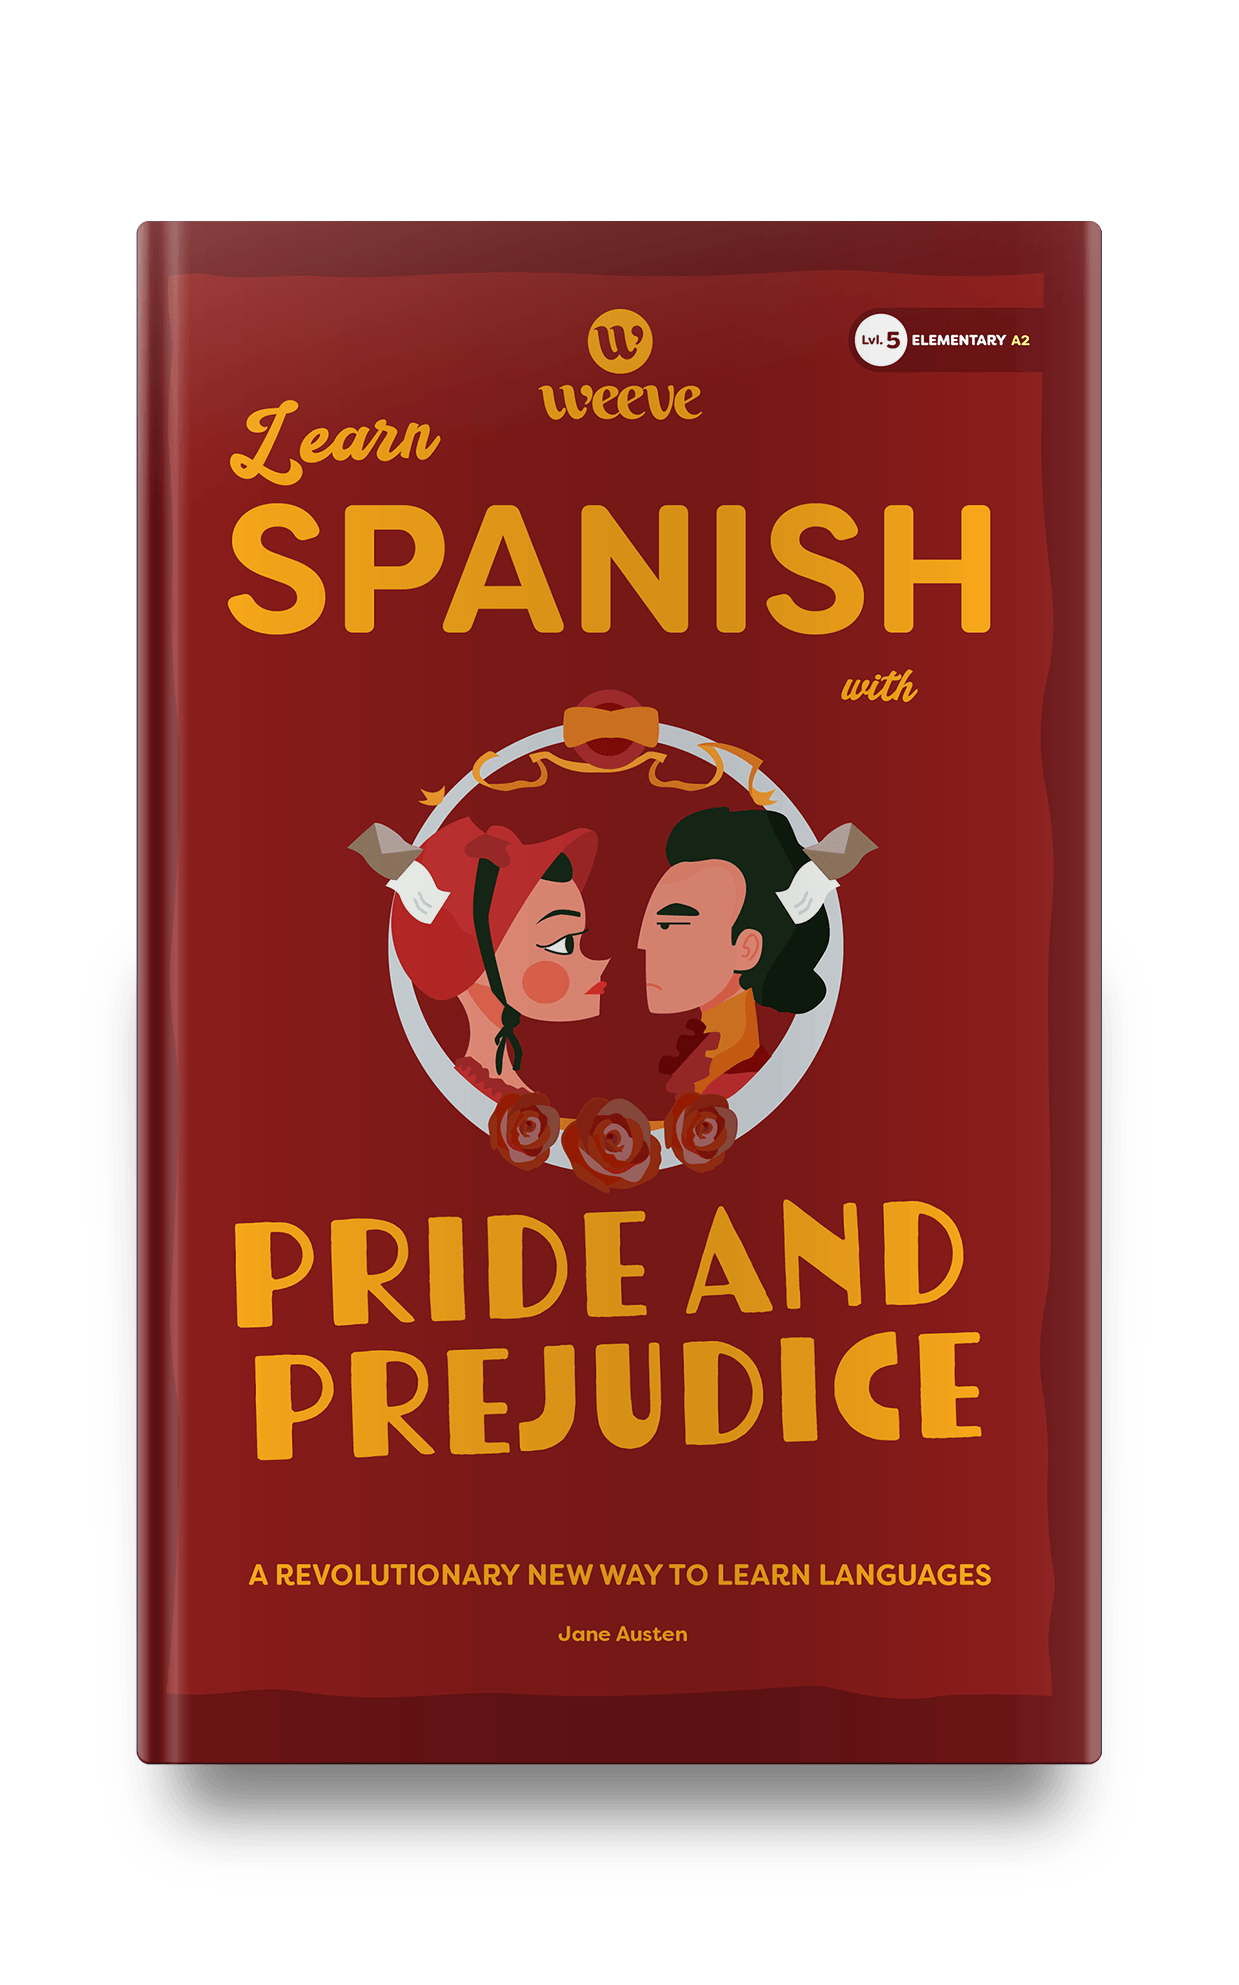 Learn Spanish With Pride and Prejudice - Weeve